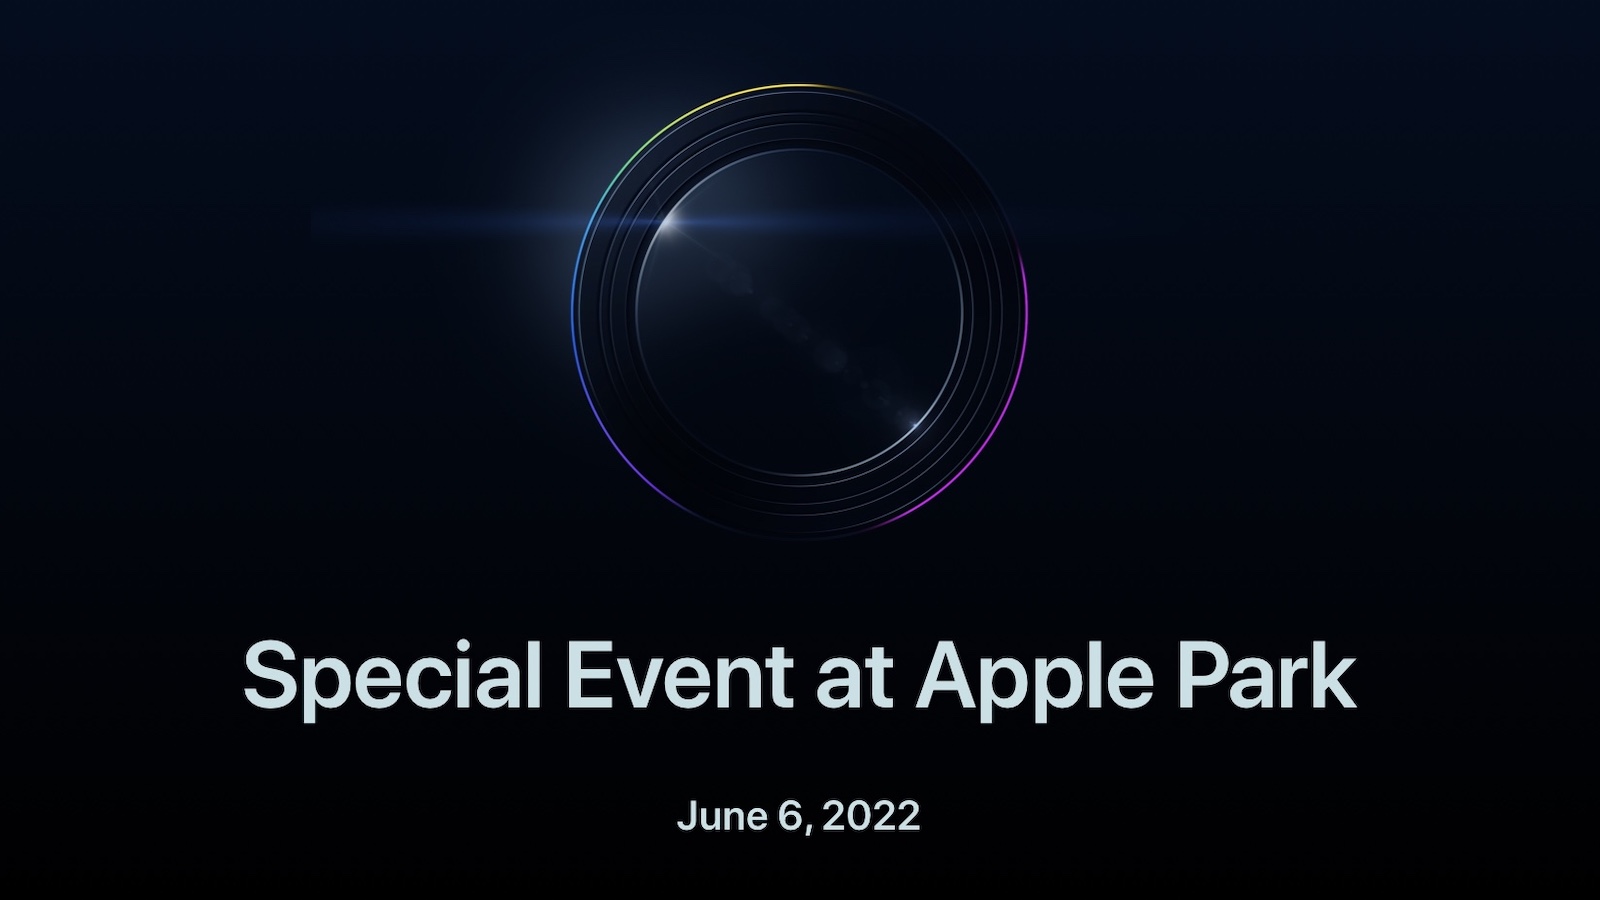 Apple Notifying Developers Who Get to Attend WWDC Viewing Event at Apple Park